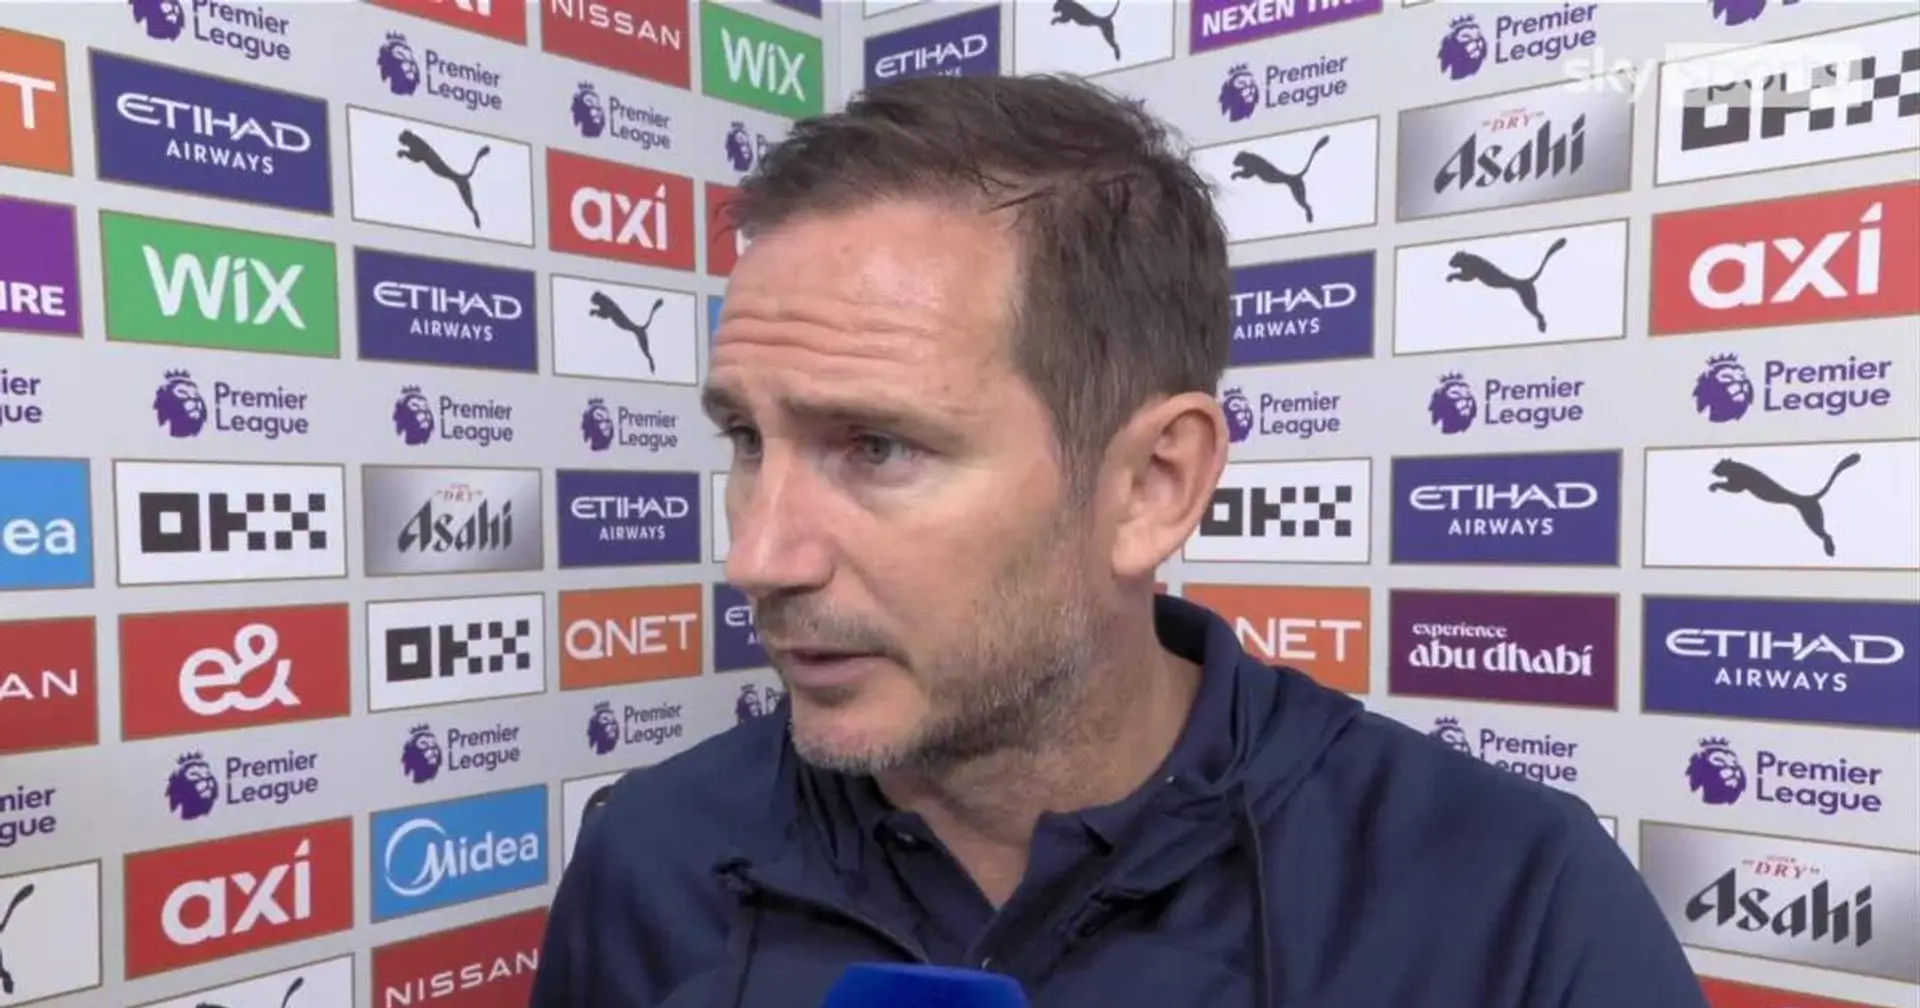 'A sign of where we're at': Lampard on Man United defeat